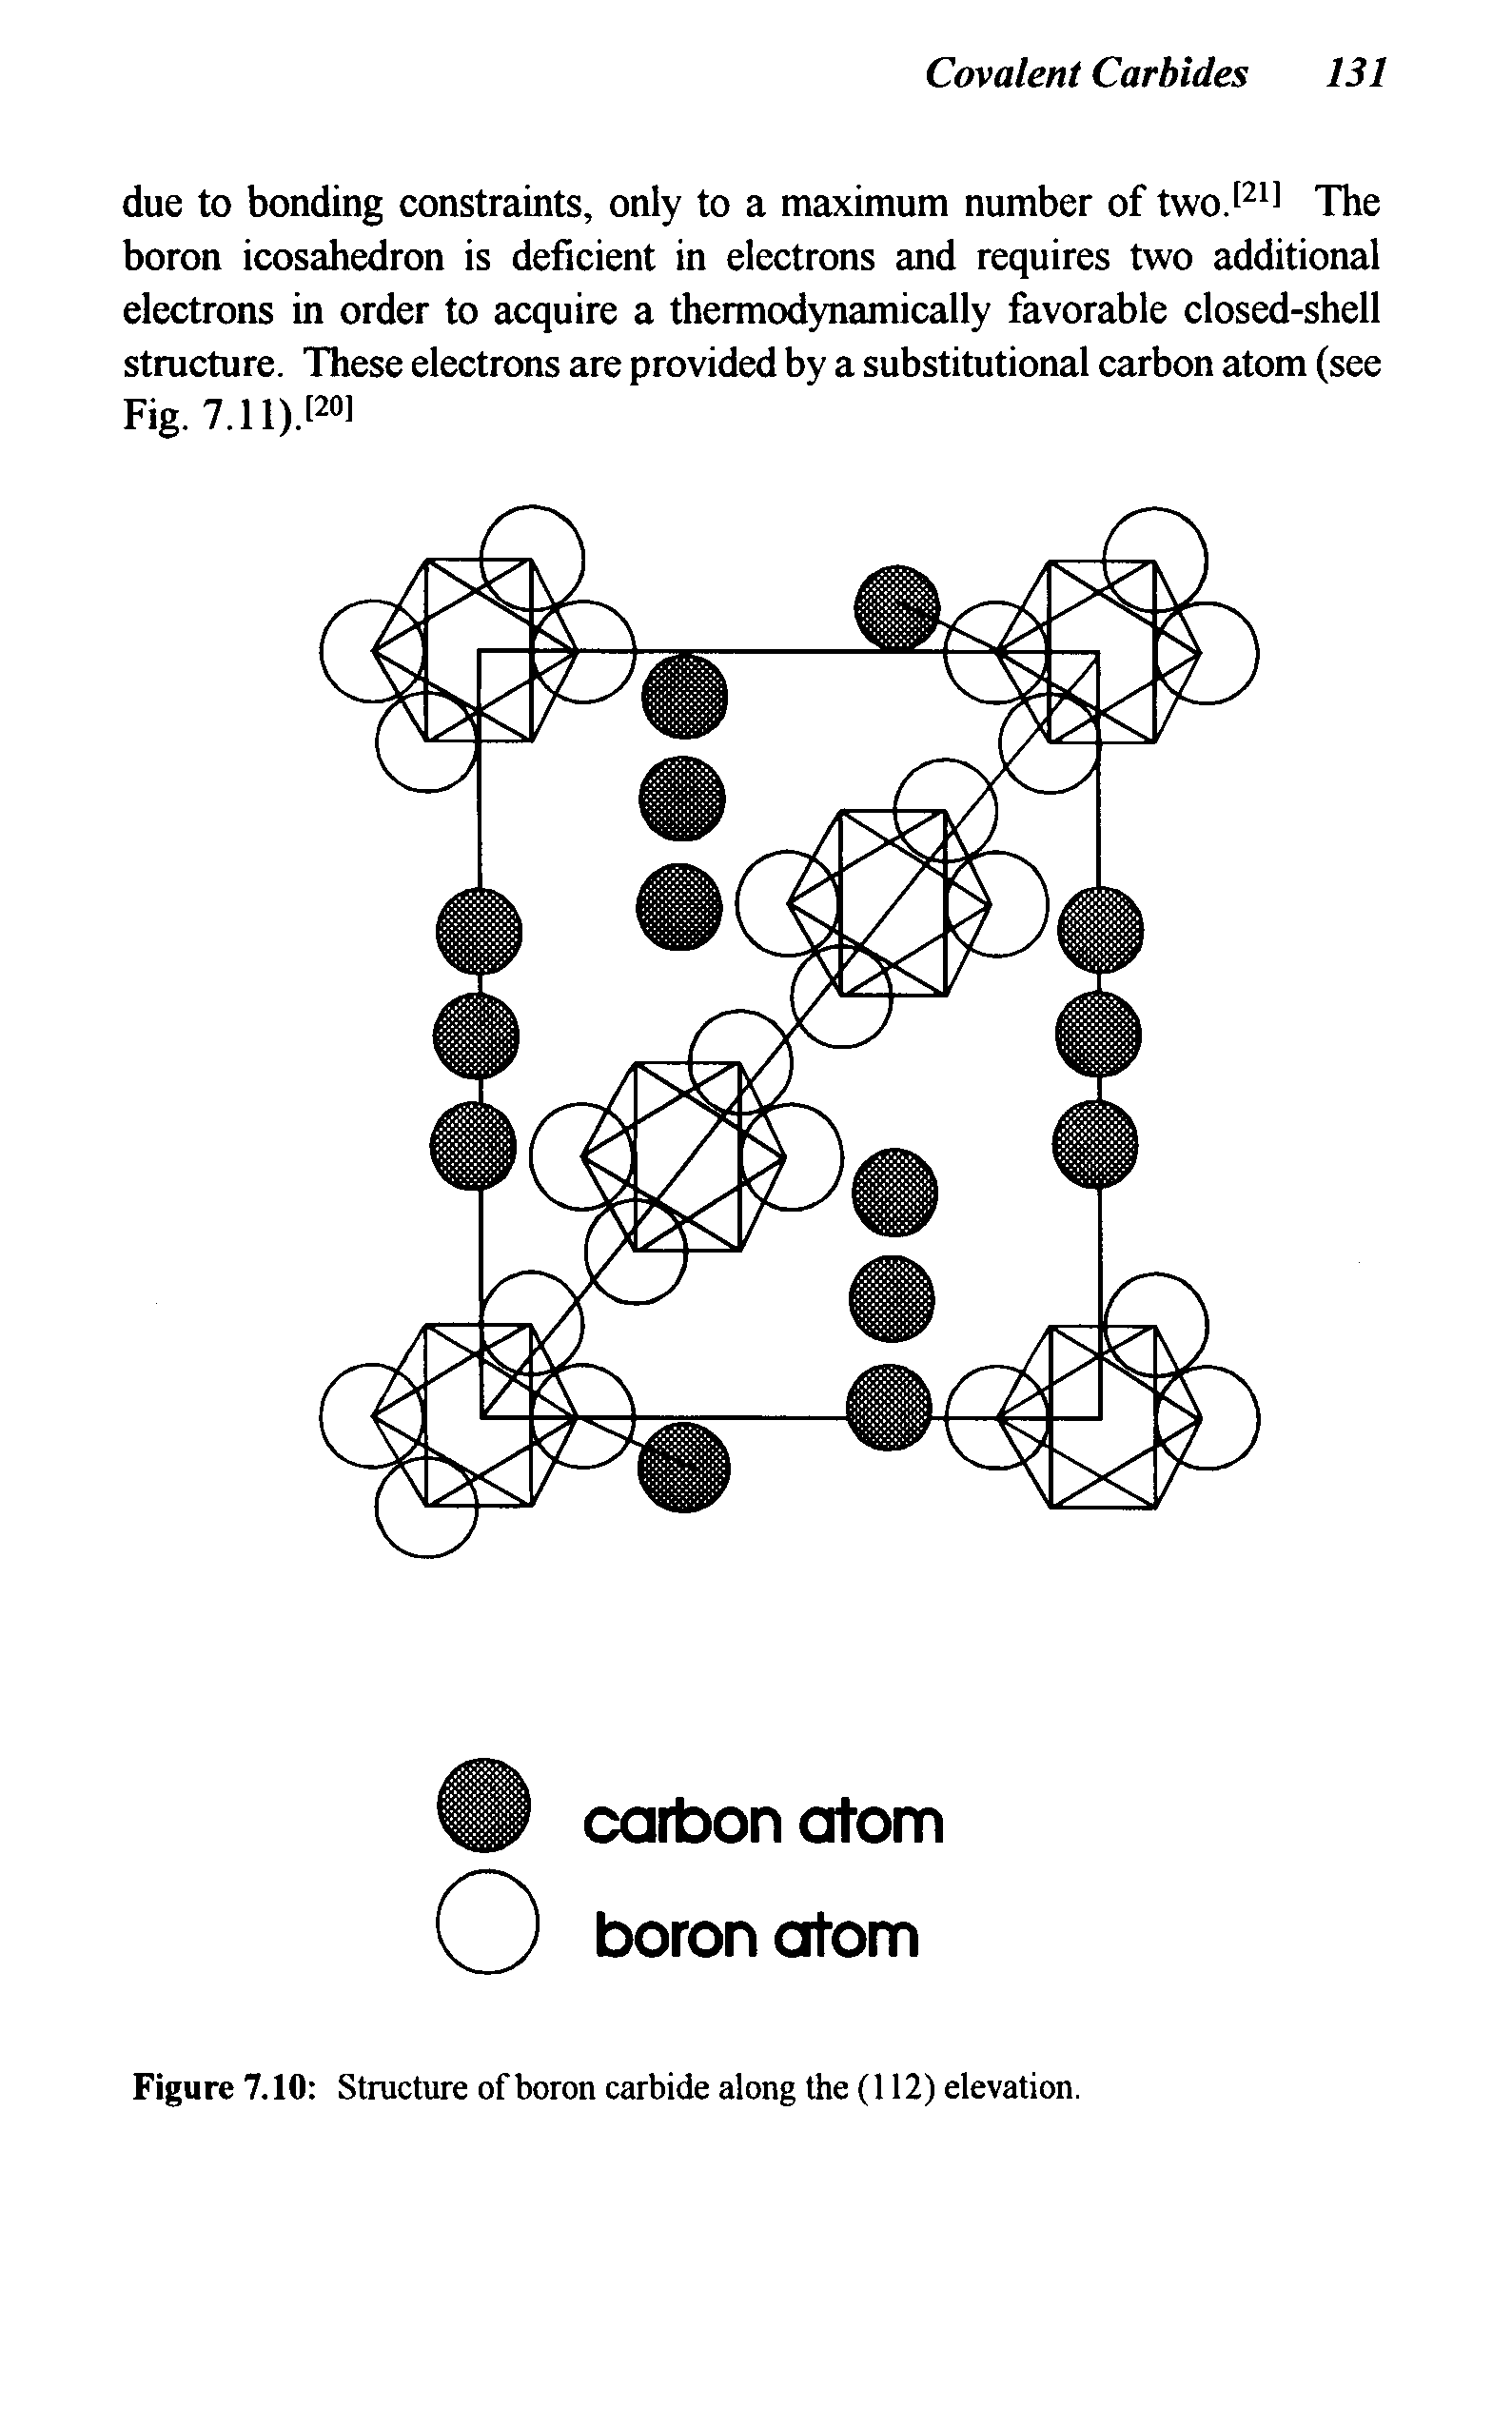 Figure 7.10 Structure of boron carbide along the (112) elevation.